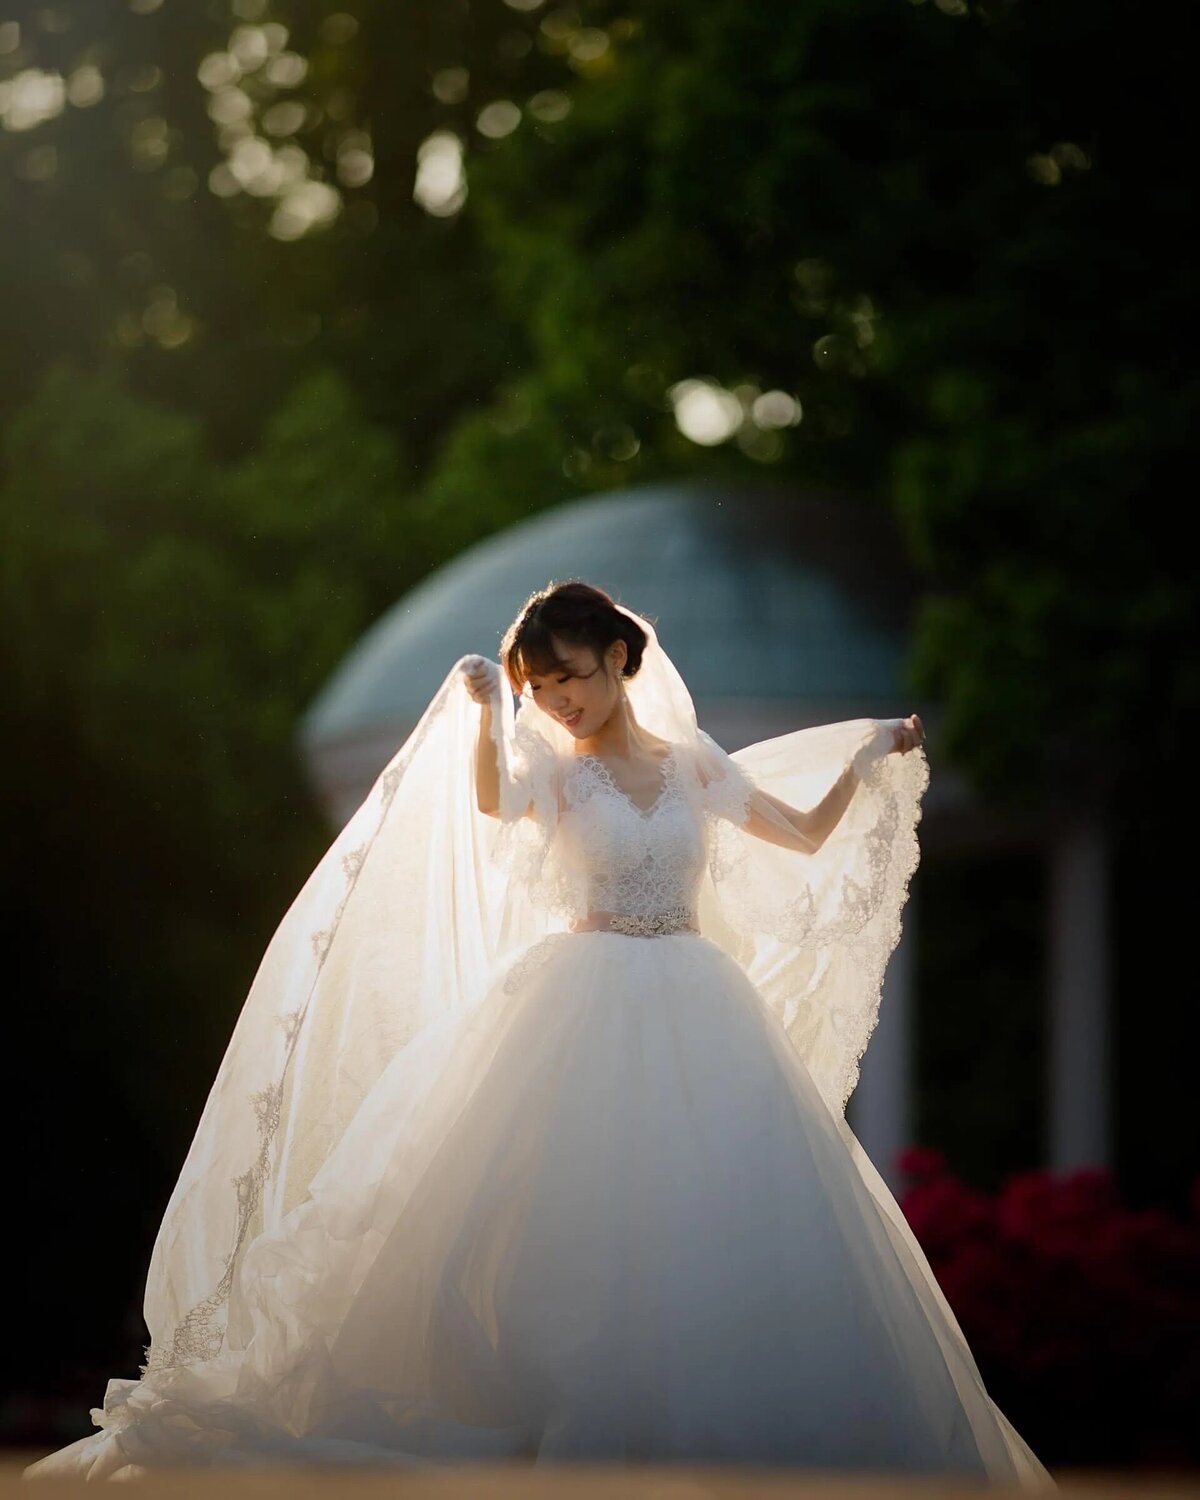 A bride in a stunning wedding gown adjusts her veil in the gentle light of sunset, with a serene expression on her face.